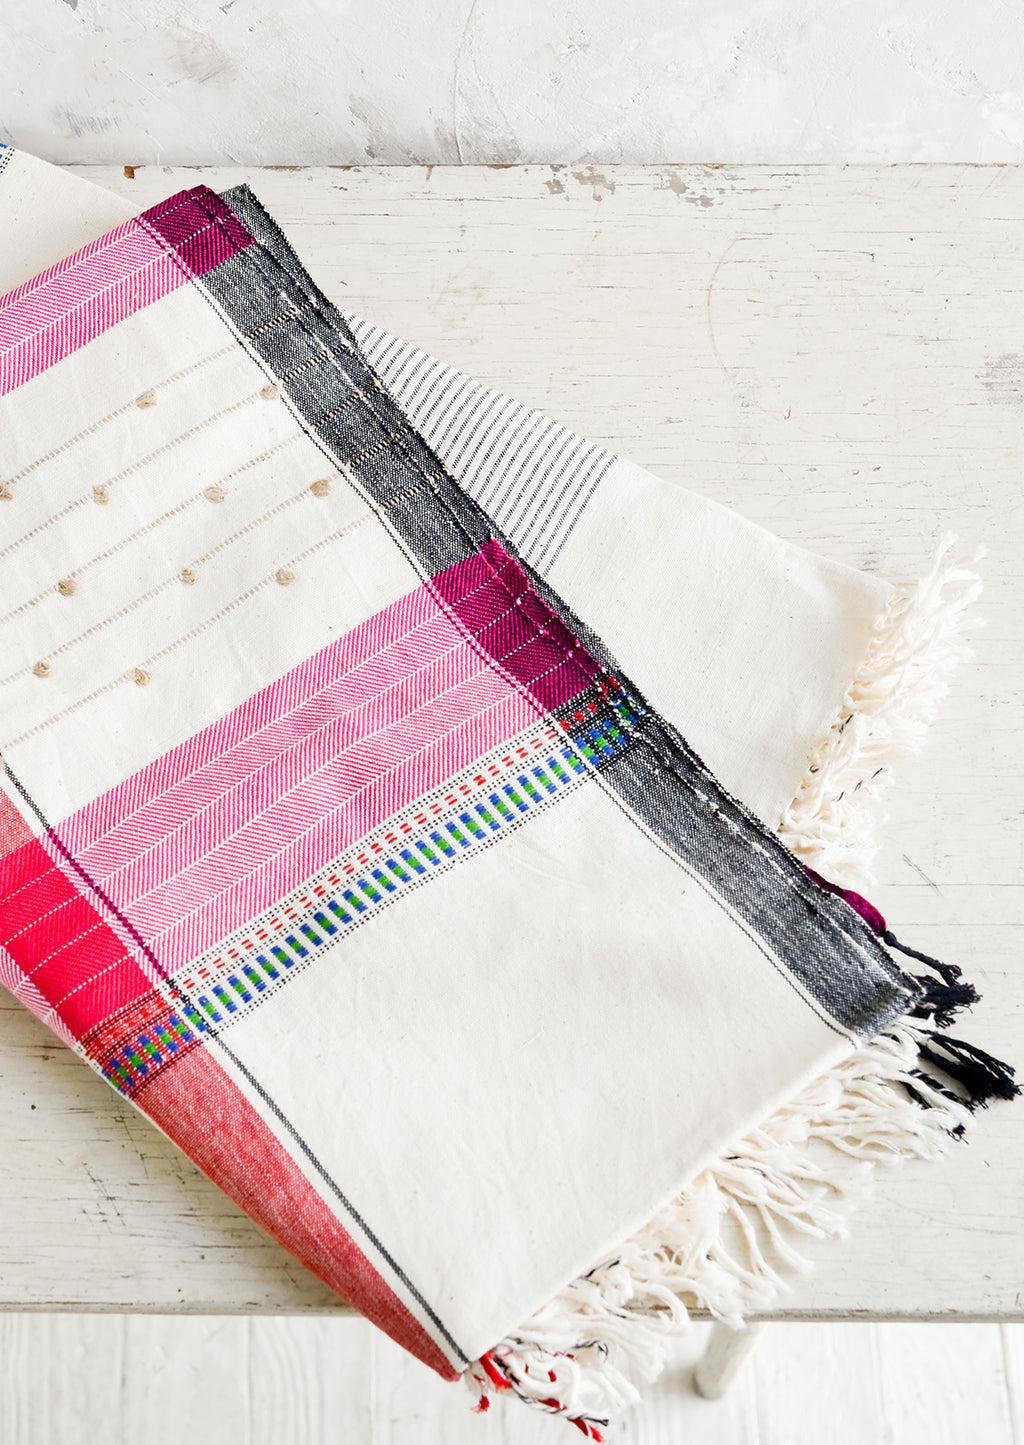 1: A woven cotton throw in a mix of colors and stitches.